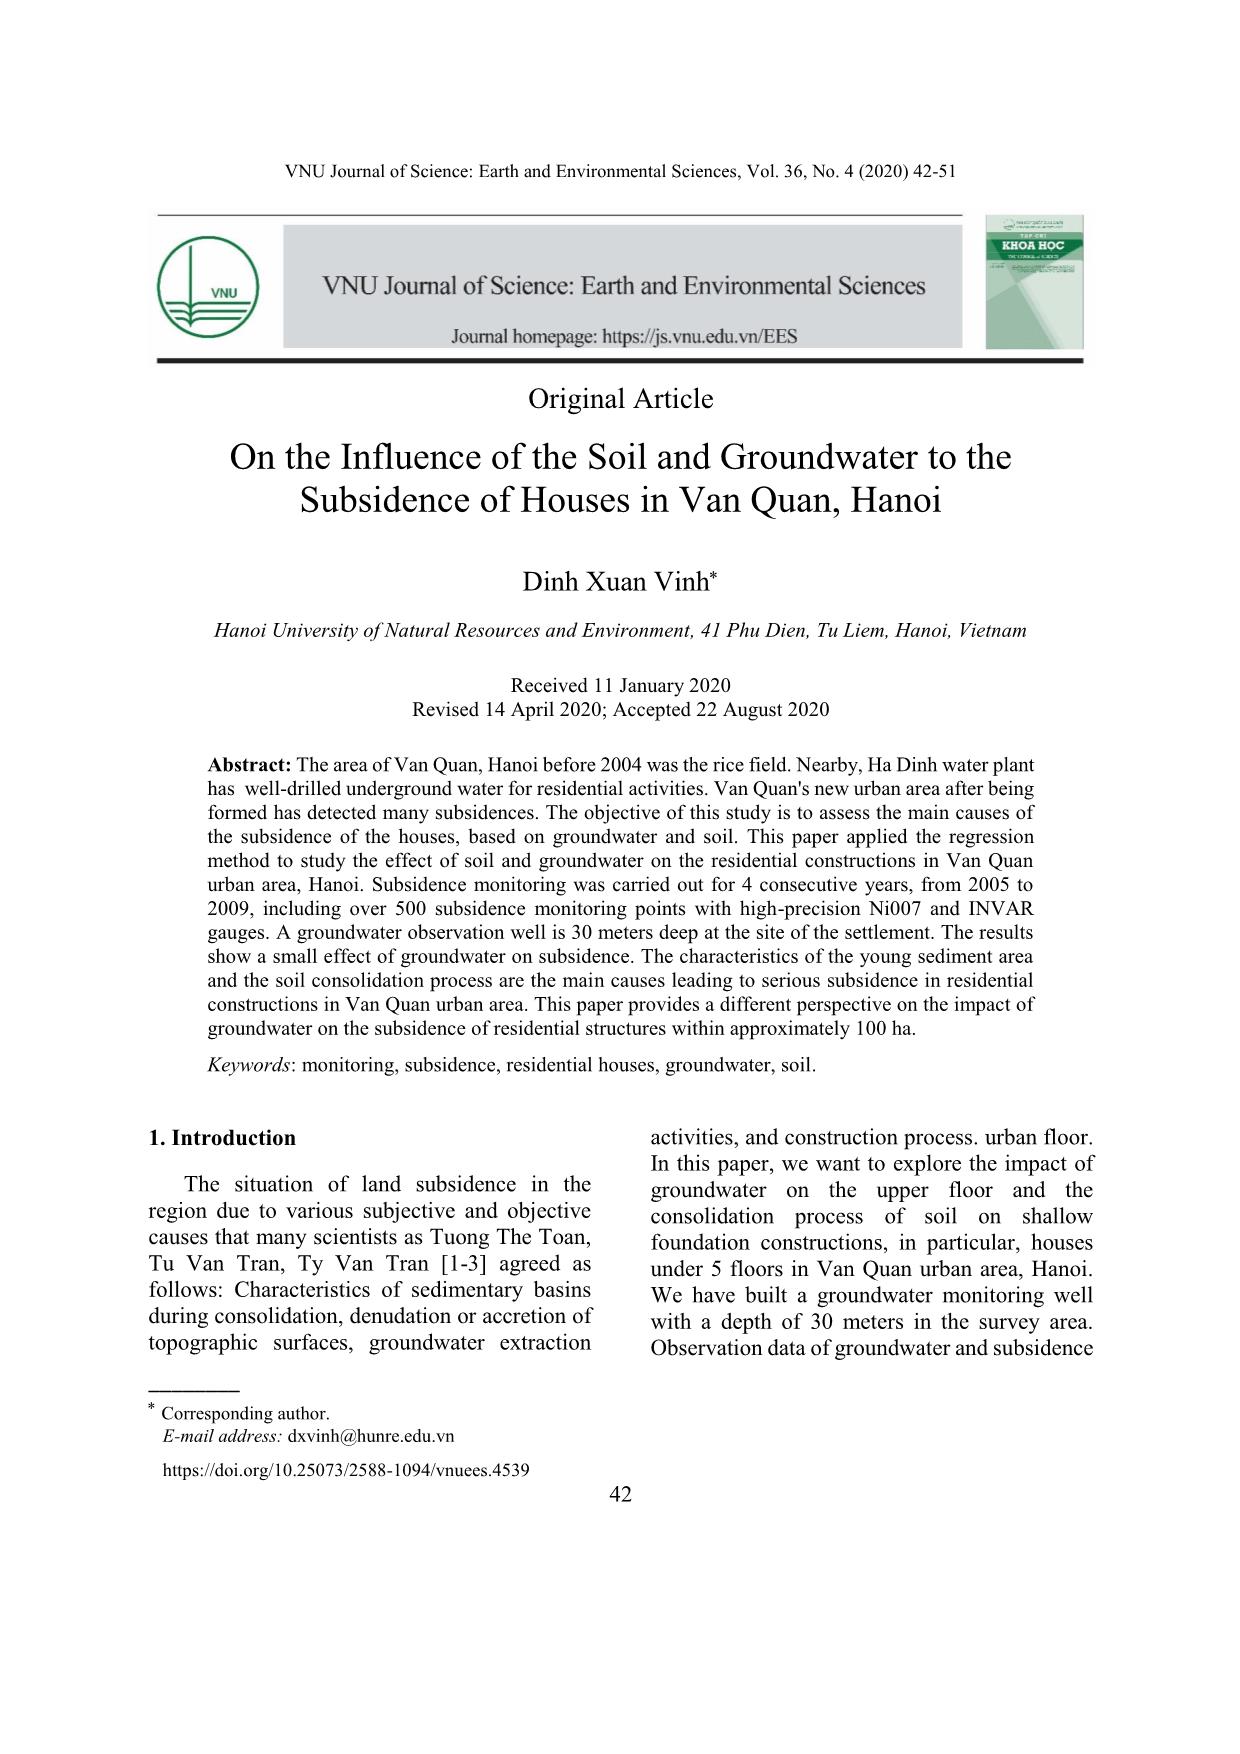 On the Influence of the Soil and Groundwater to the Subsidence of Houses in Van Quan, Hanoi trang 1